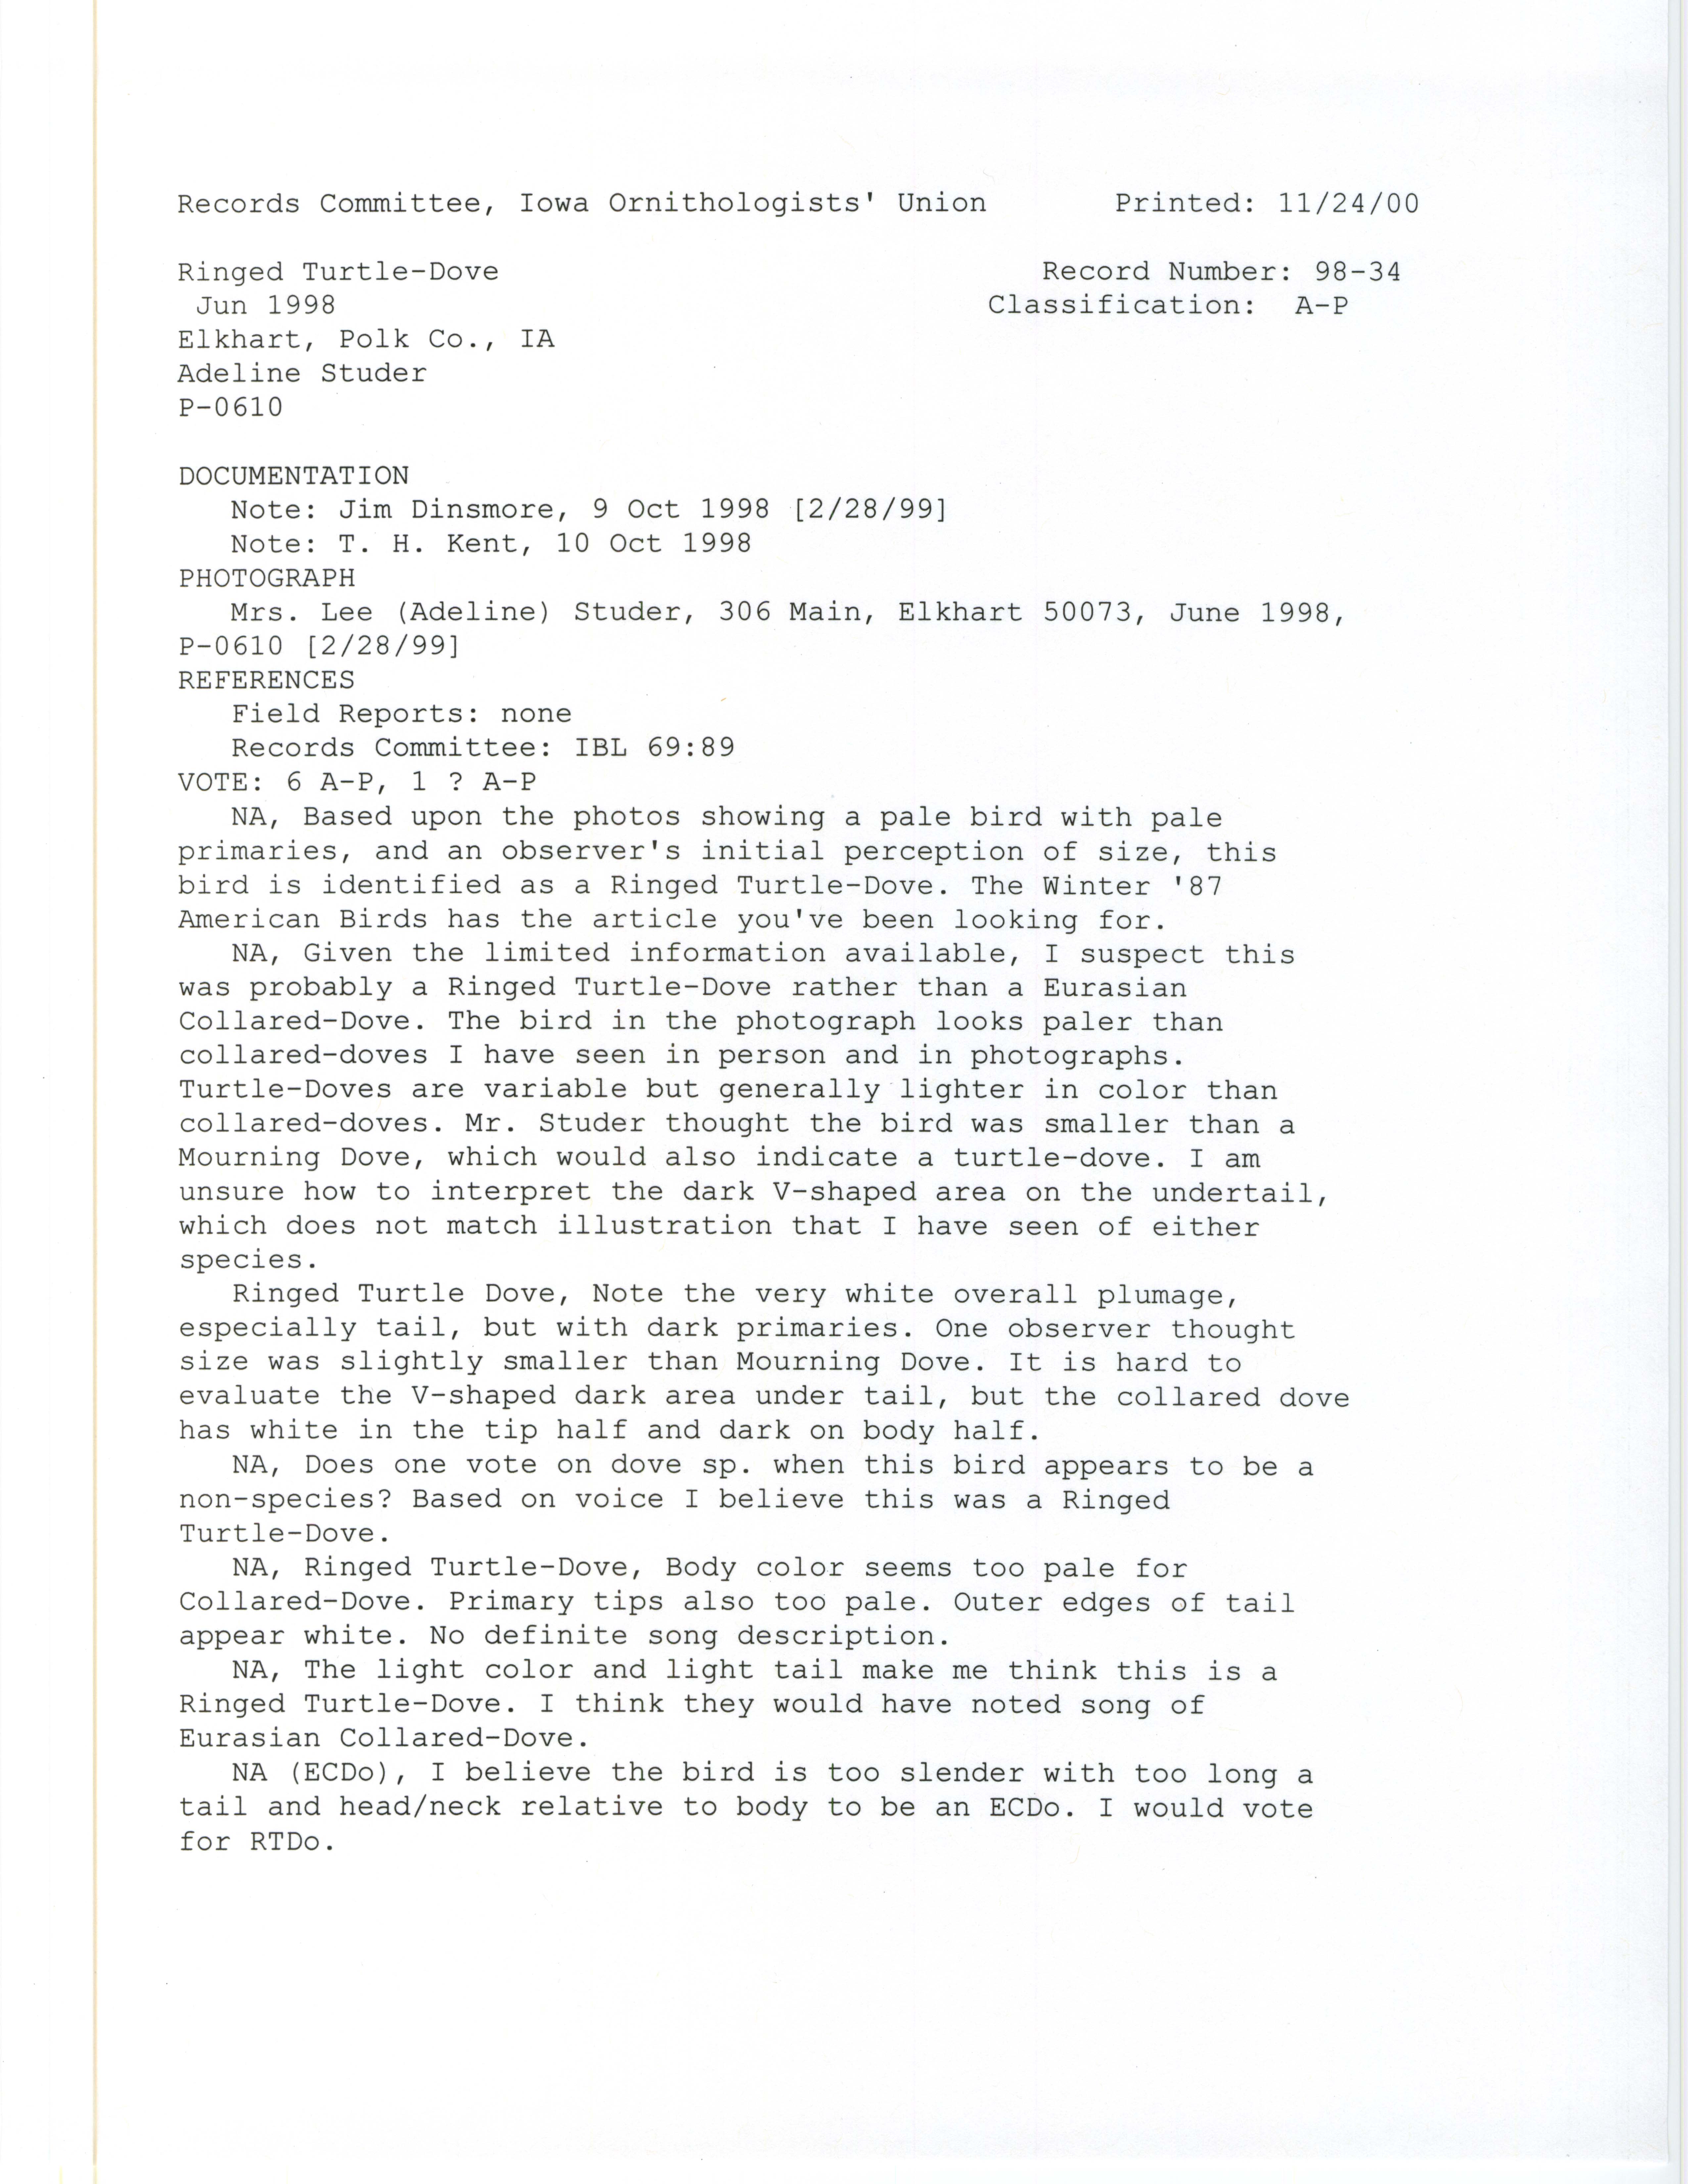 Records Committee review for rare bird sighting for Ringed Turtle-Dove at Elkhart in 1998